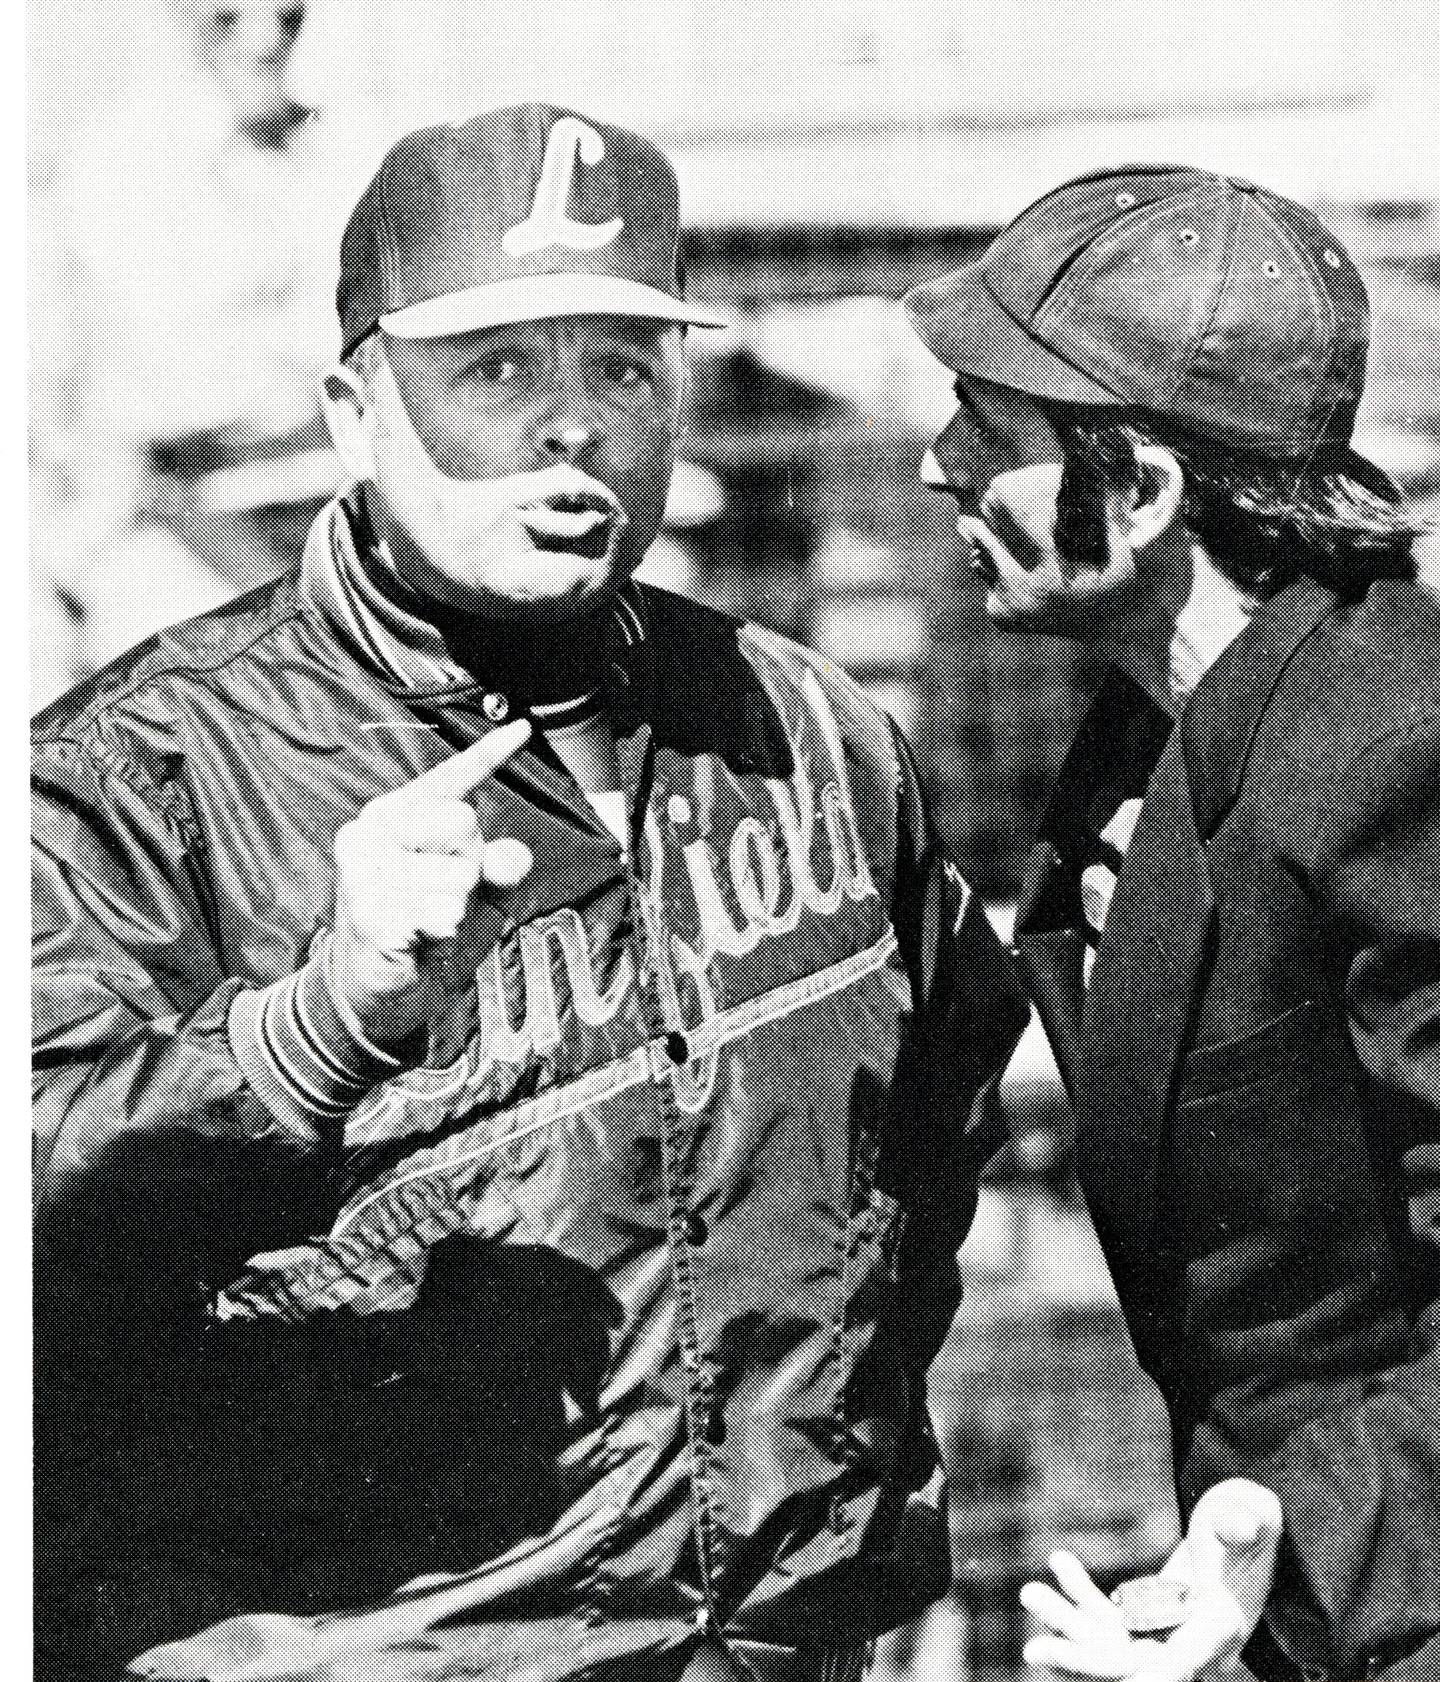 Ad Rutschman, who coached baseball and football for years at Linfield University in Oregon, speaks with an umpire.